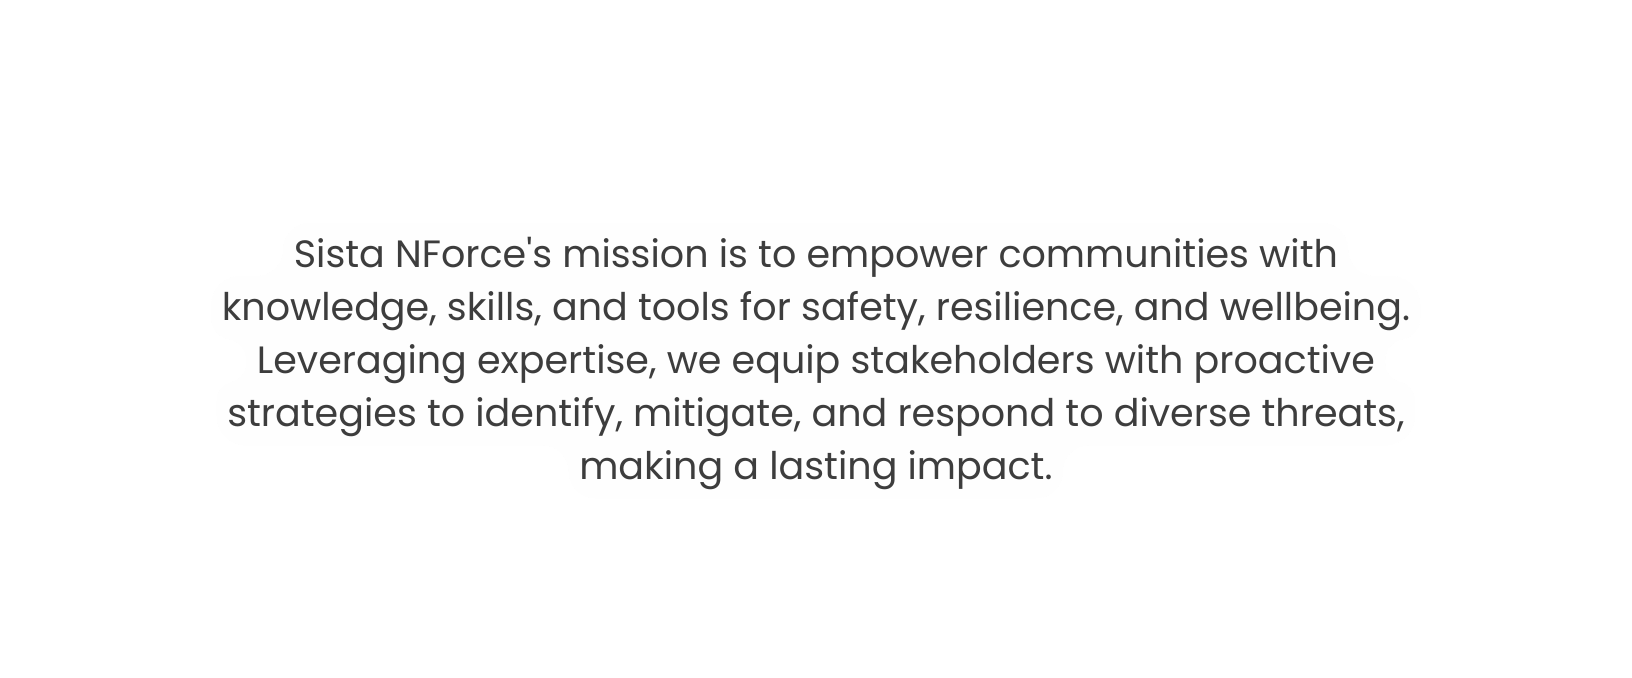 Sista NForce s mission is to empower communities with knowledge skills and tools for safety resilience and wellbeing Leveraging expertise we equip stakeholders with proactive strategies to identify mitigate and respond to diverse threats making a lasting impact